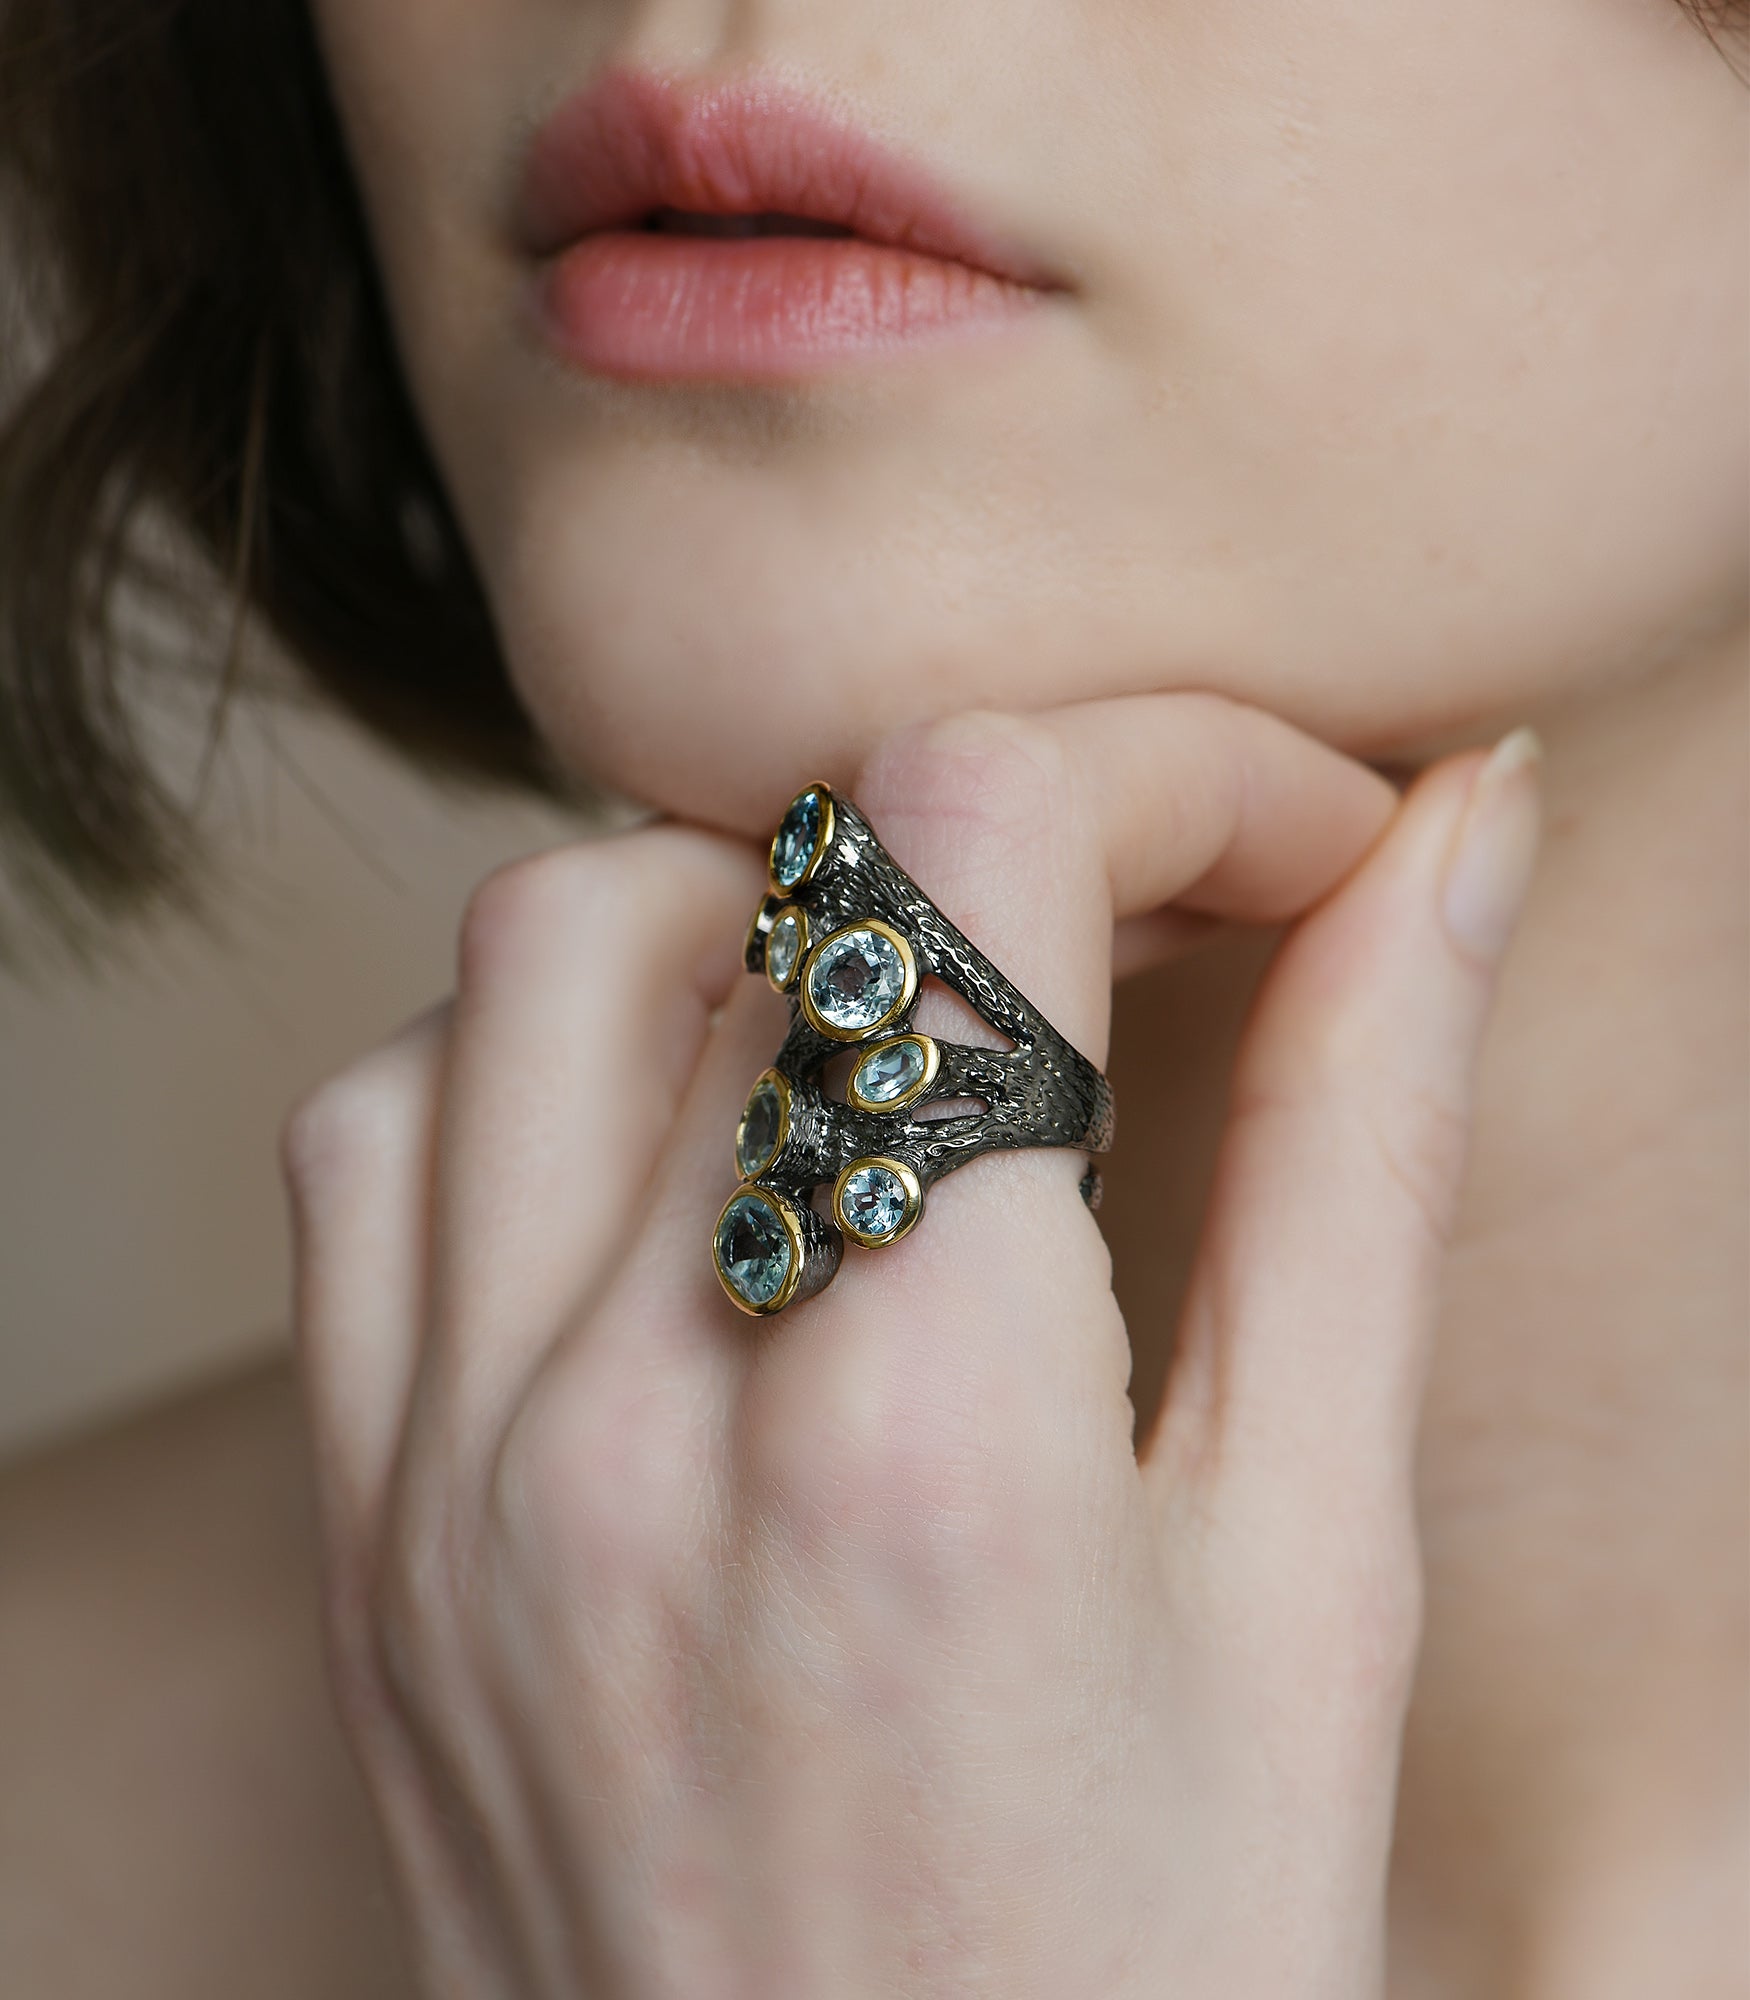 An oxidised sterling silver ring. The ring has an irregular shape with gold detailing and 8 blue topaz stones.